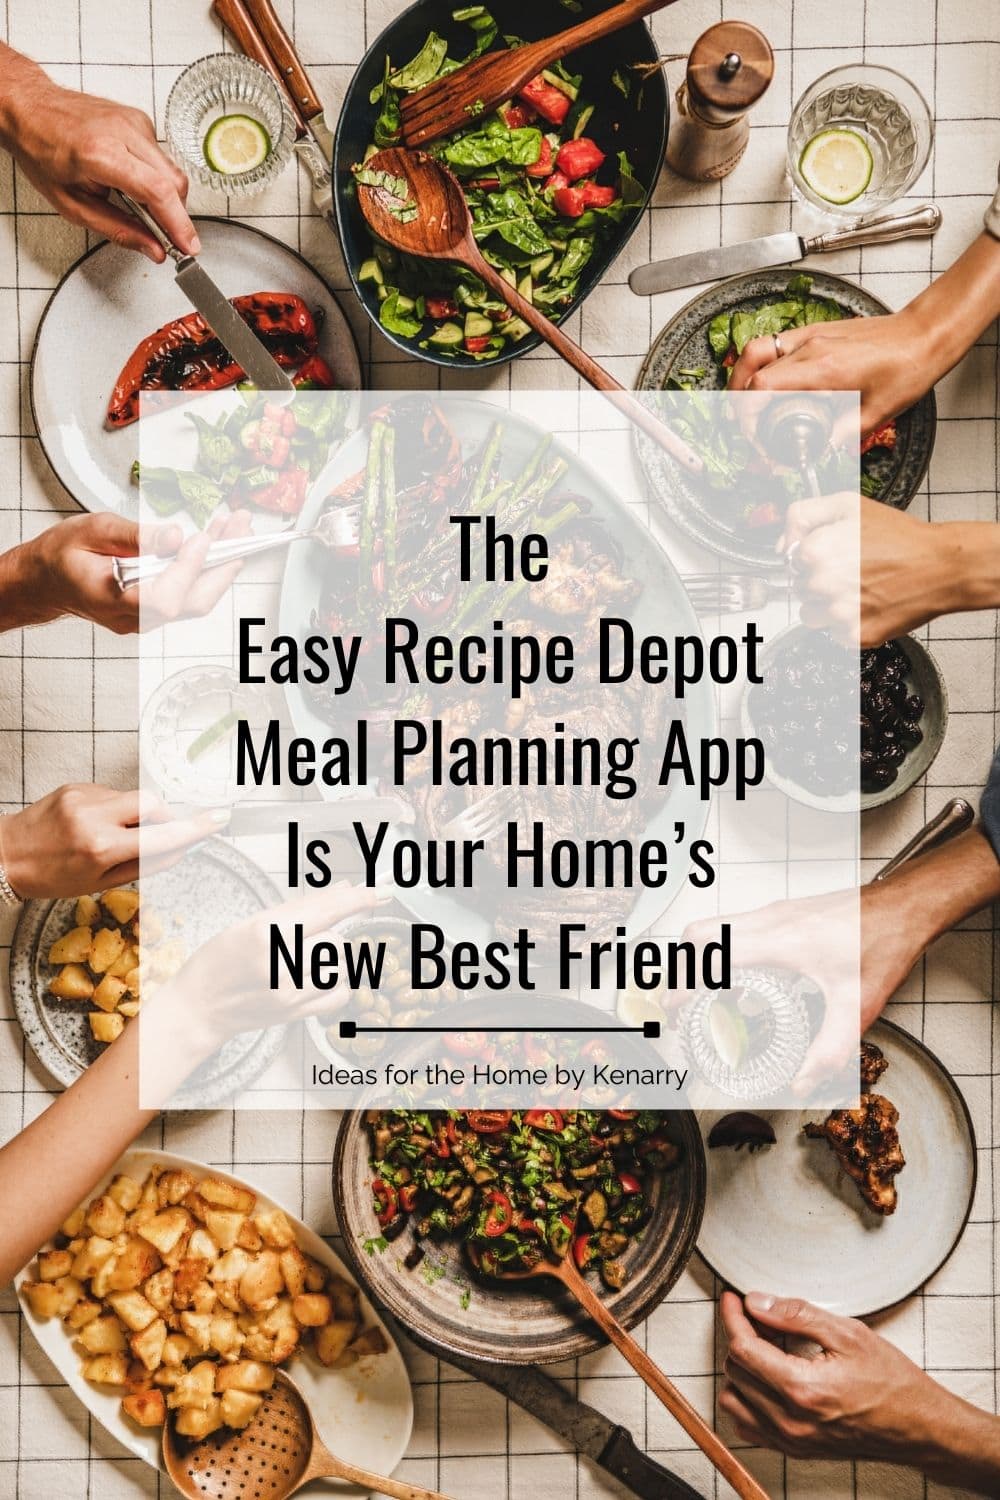 The Easy Recipe Depot meal planning app is your home's new best friend.